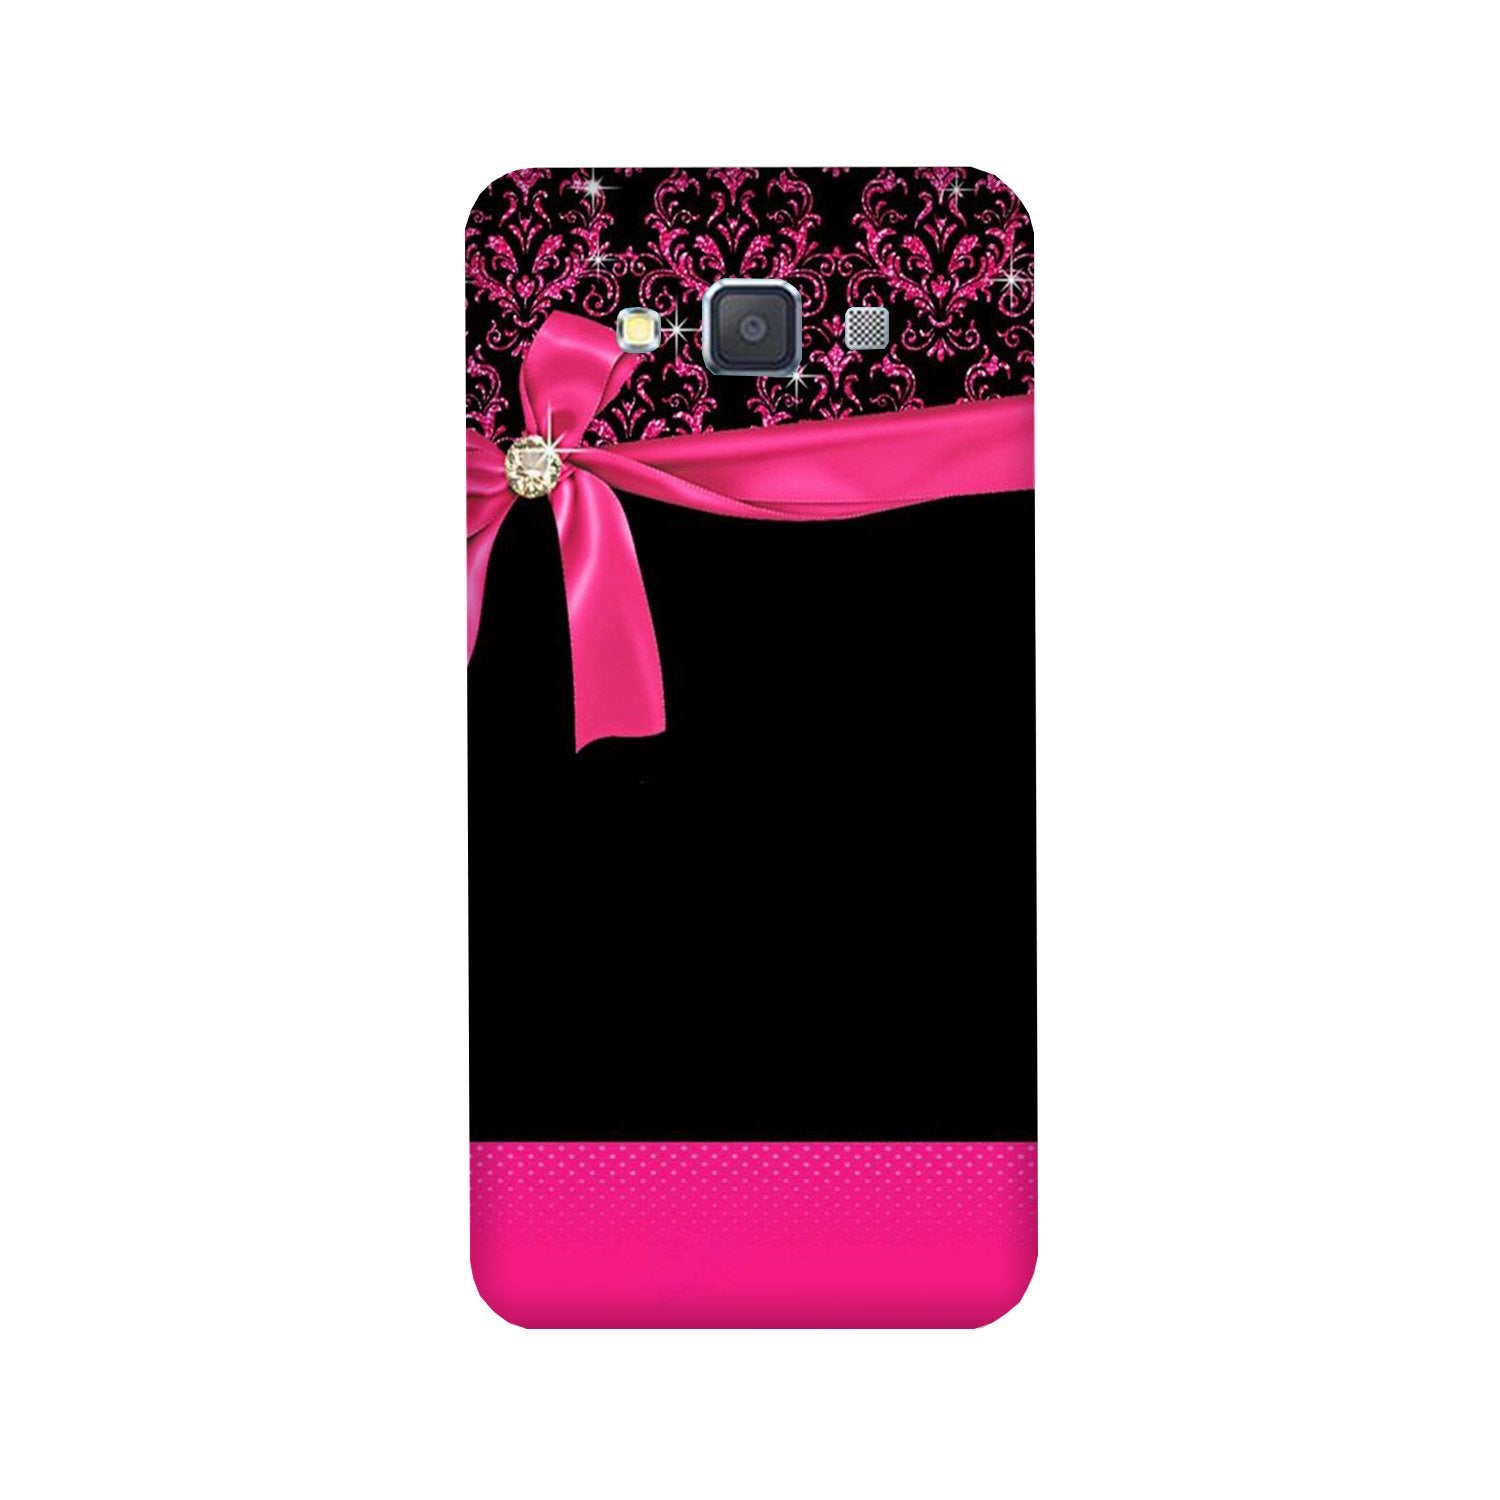 Gift Wrap4 Case for Galaxy J5 (2016)